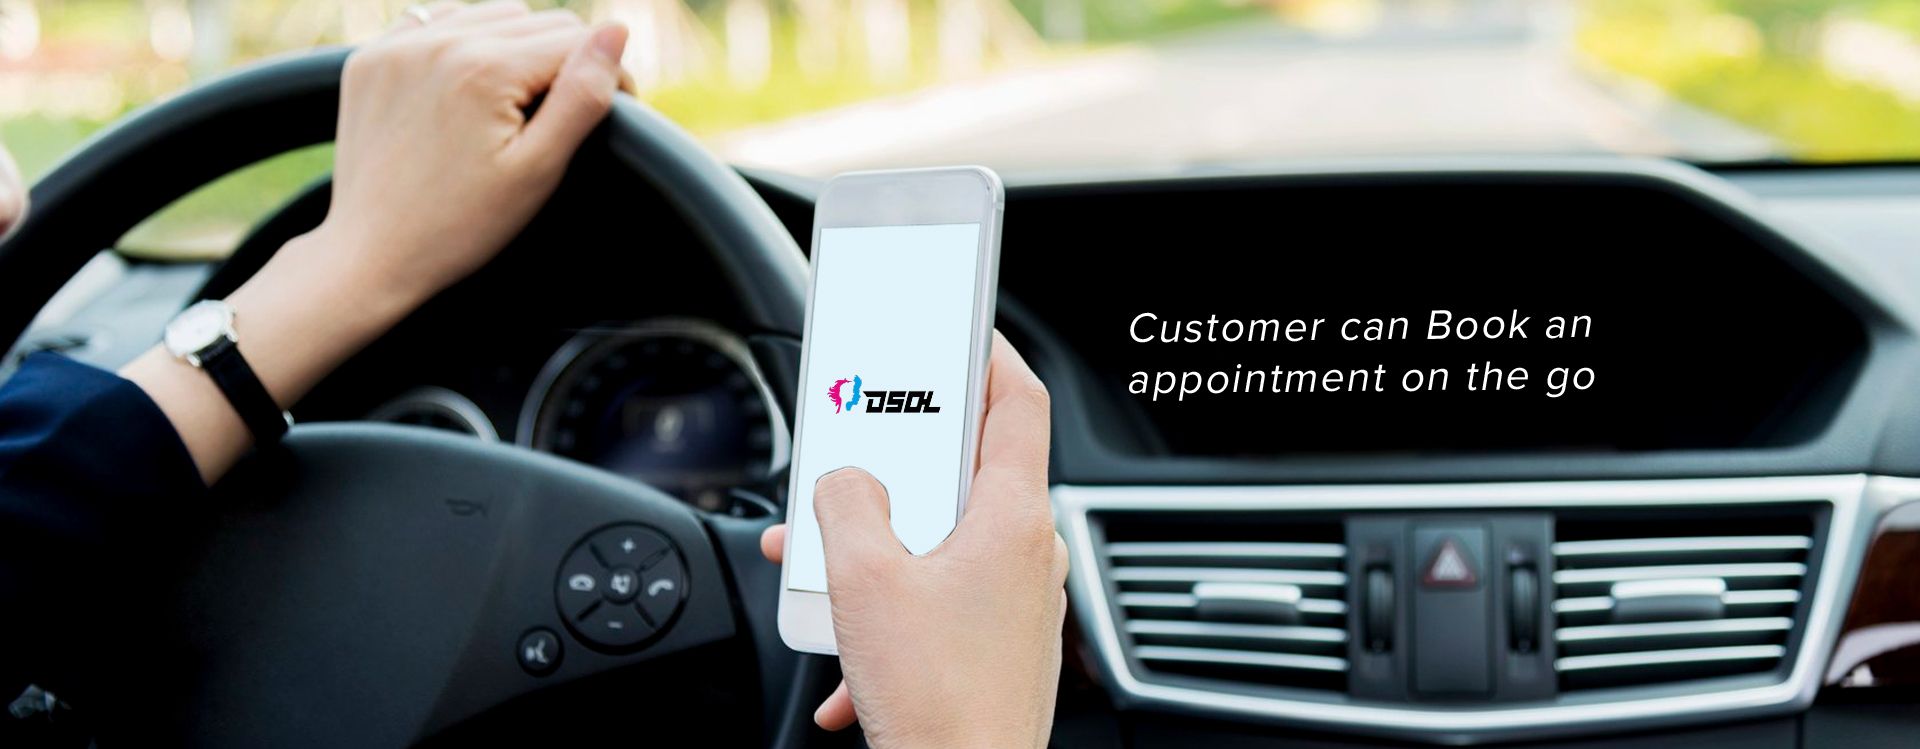 Customer can Book an appointment on the go | easy salon sofware